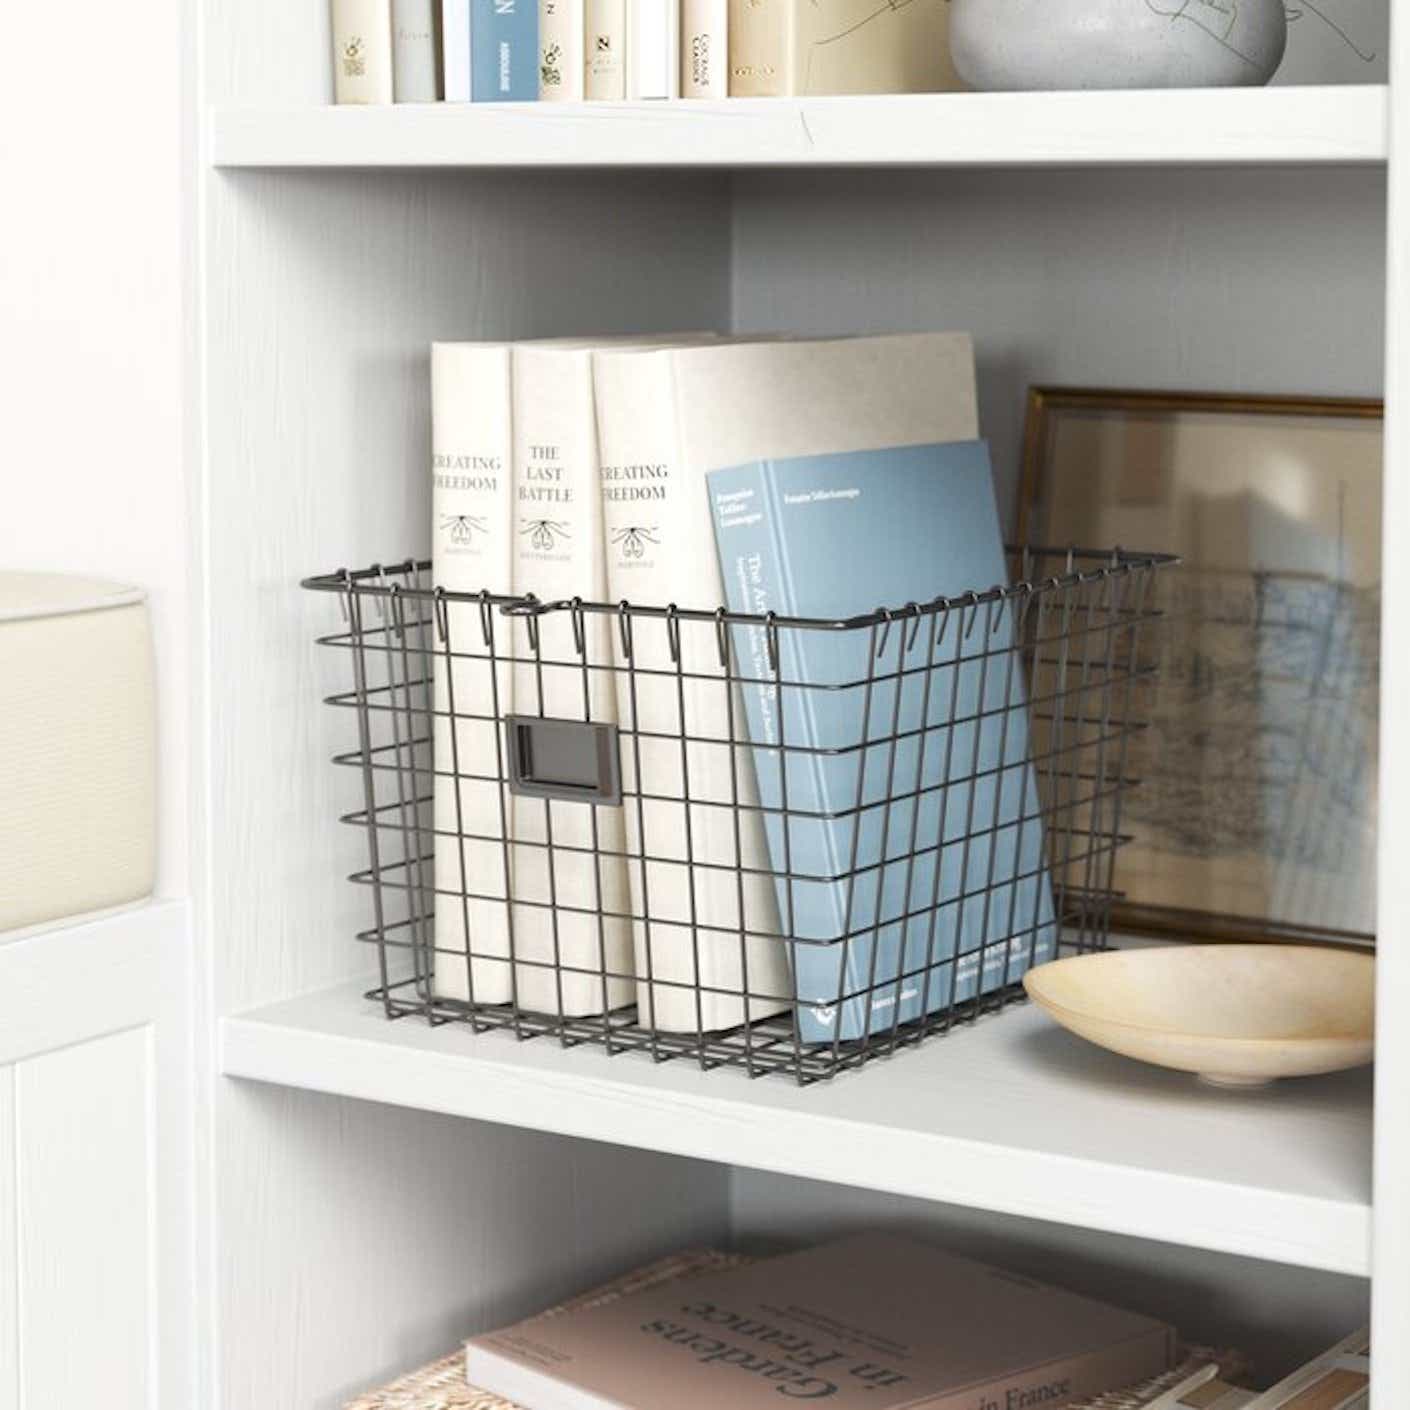 A rustic yet industrial wire storage basket holds some books.